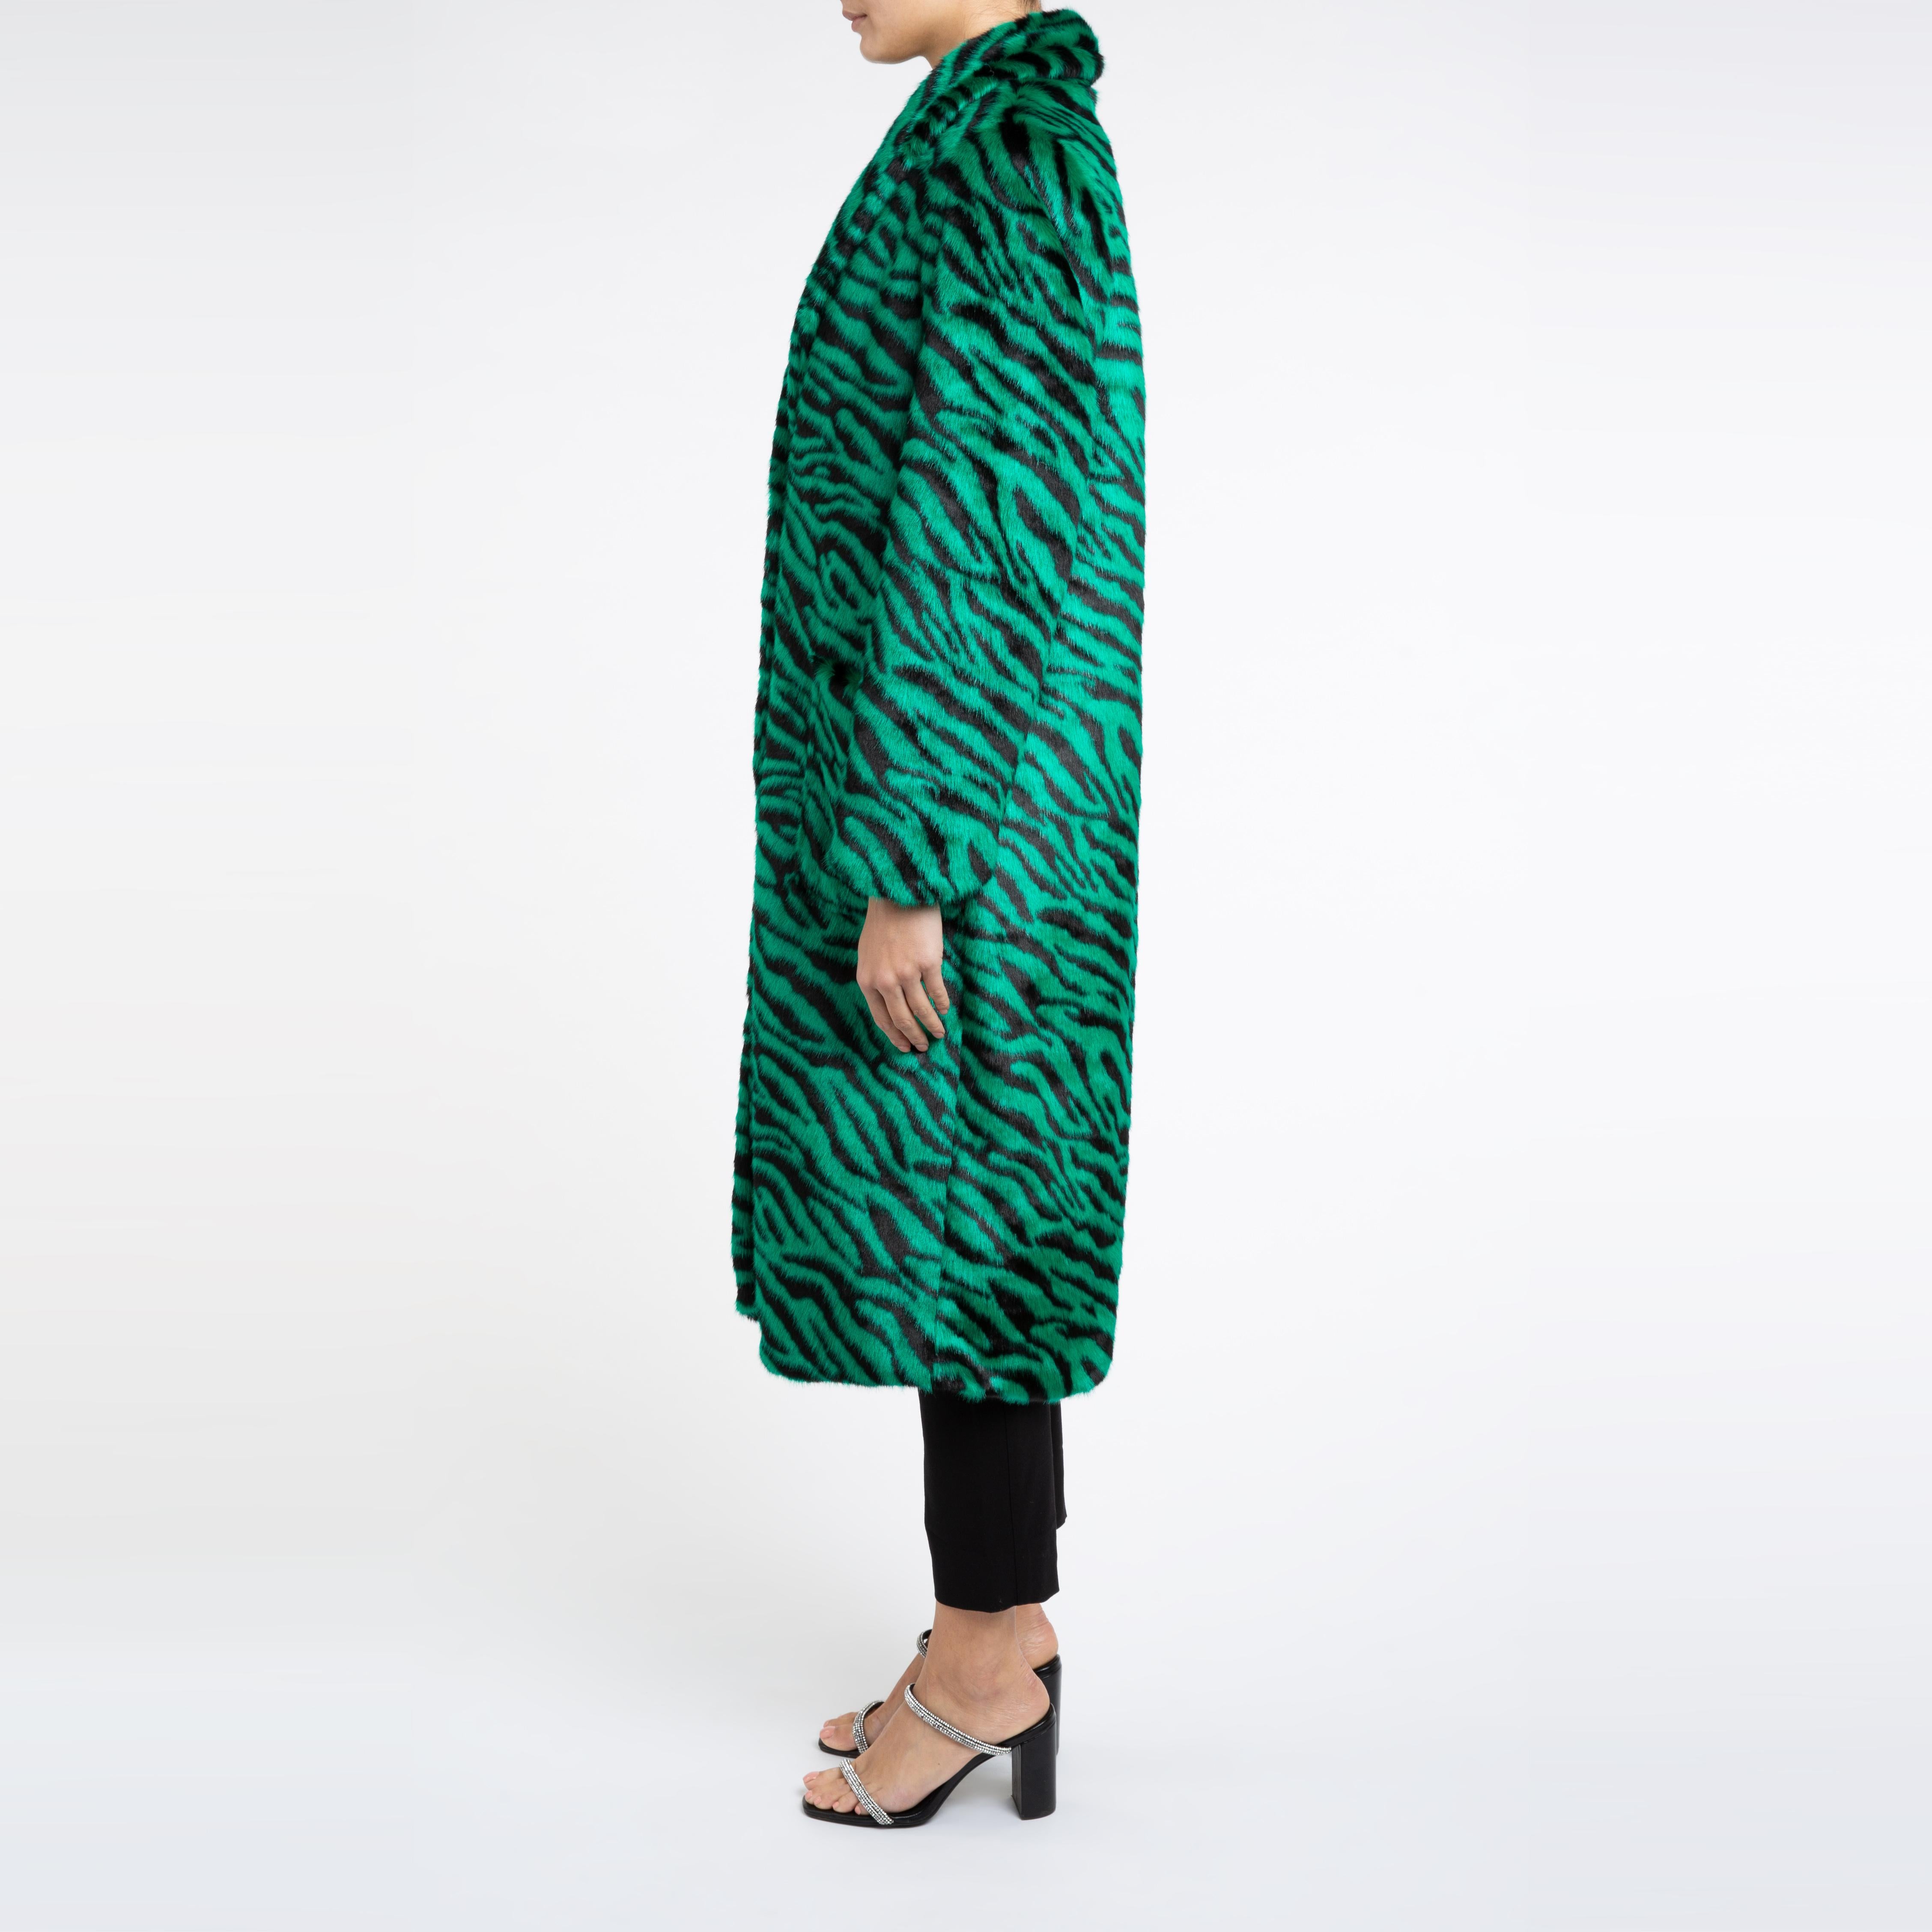 Esmeralda Faux Fur Coat in Emerald Green Zebra Print size uk 8

A coat for dressing up and down with jeans or a dress and to keep you cosy for the cold weather. 
This longline design is flattering and easy to wear with jumpers etc with its relaxed